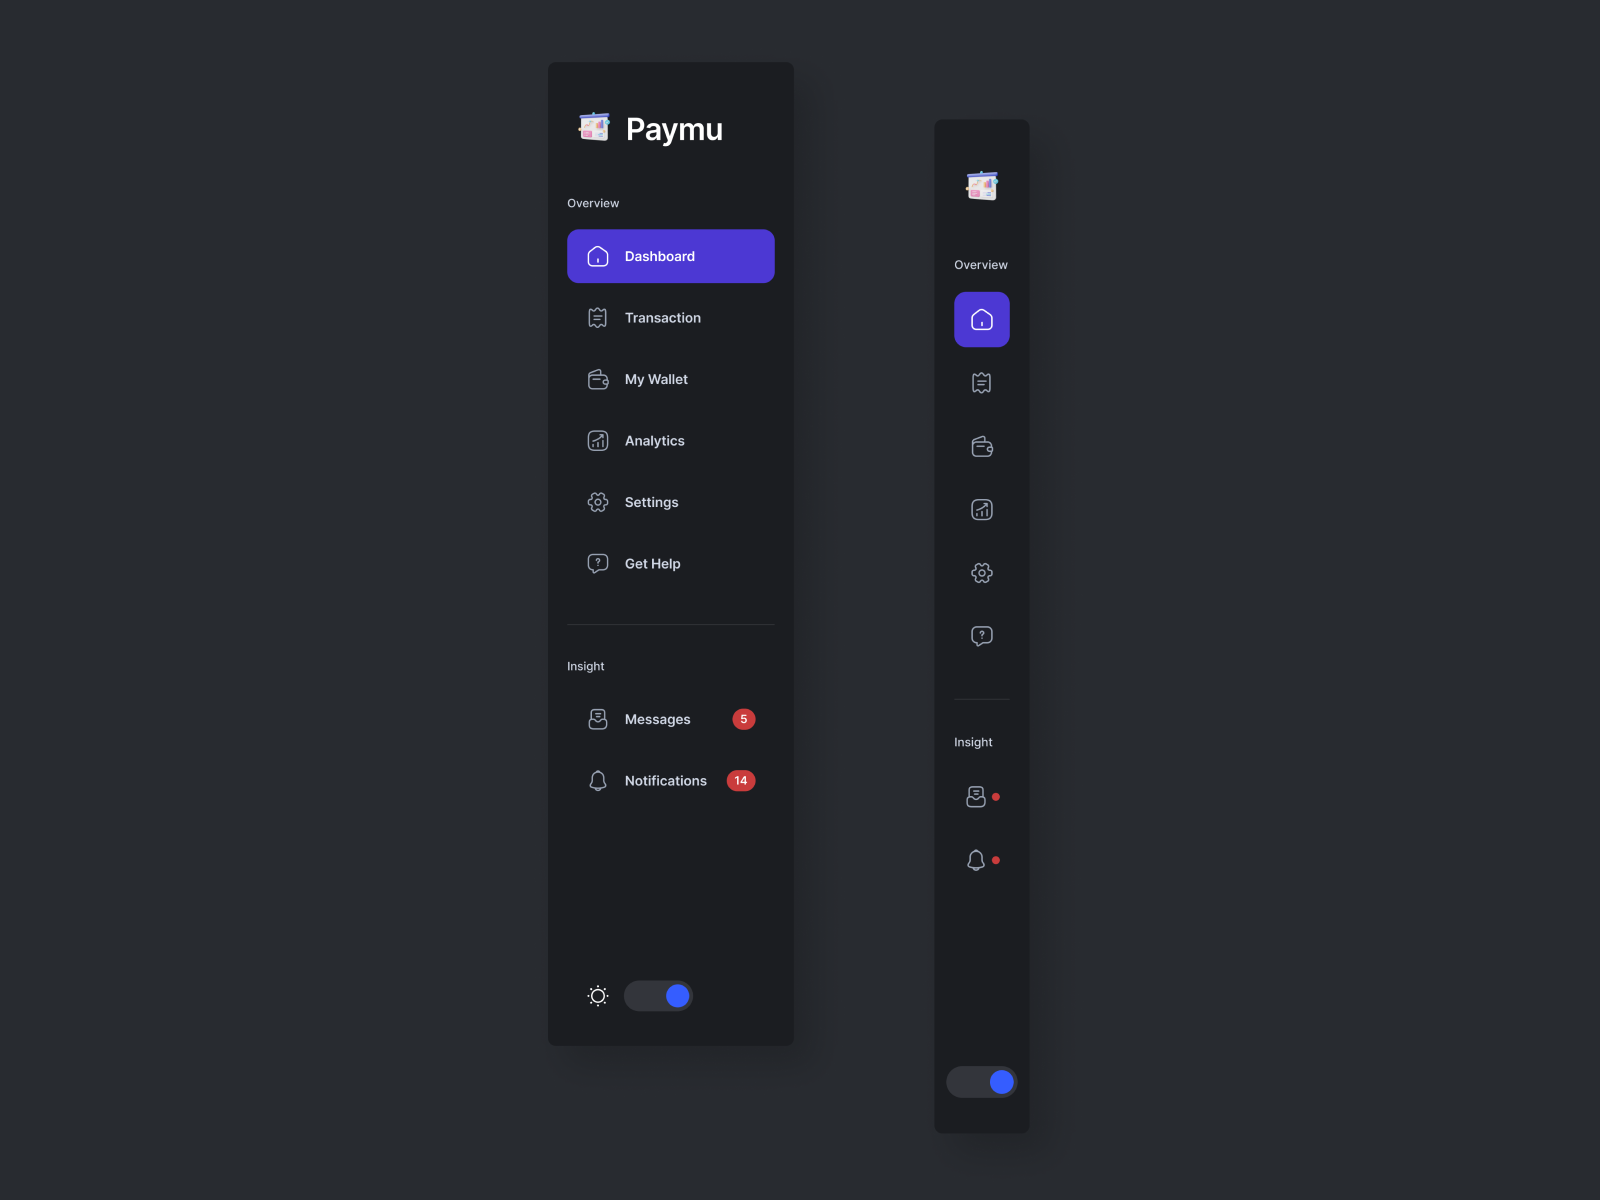 Paymu - Financial Dashboard by Ilham Anugrah on Dribbble